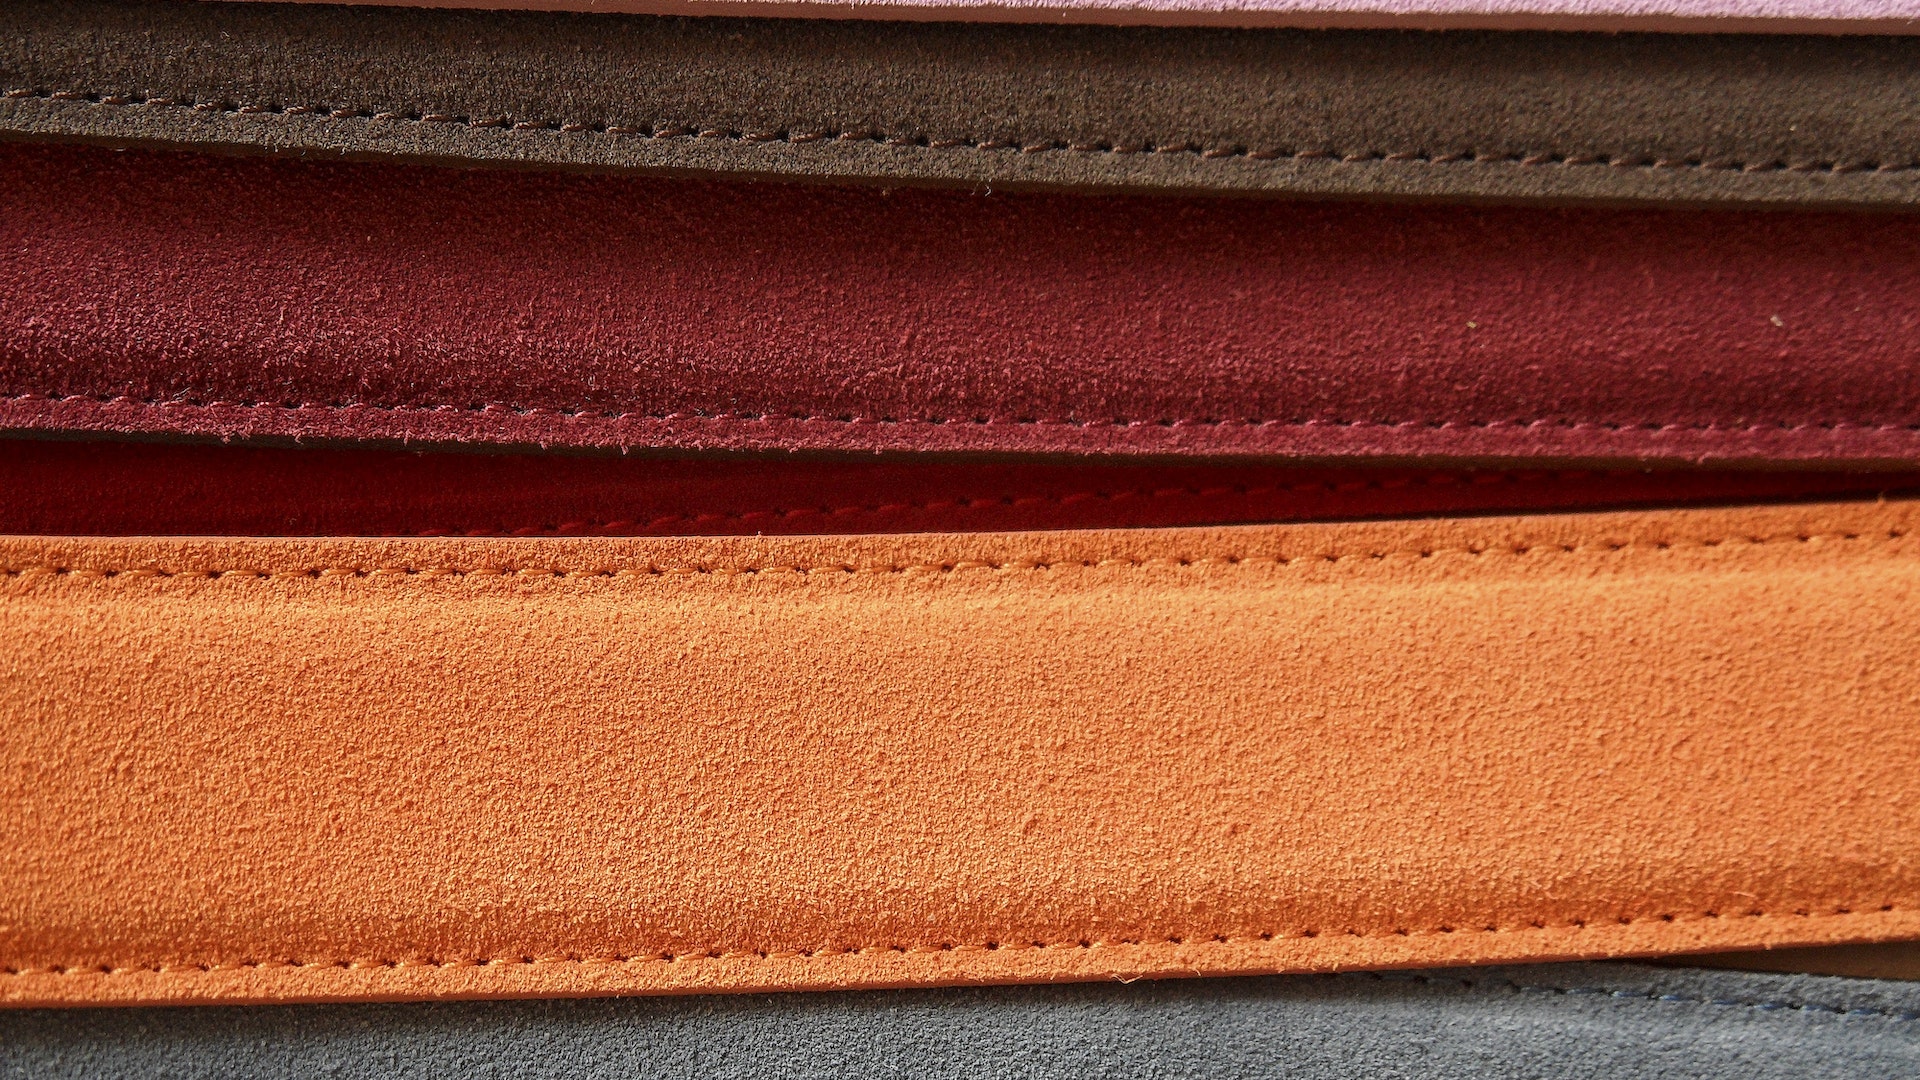 Multiple leather wallets stashed